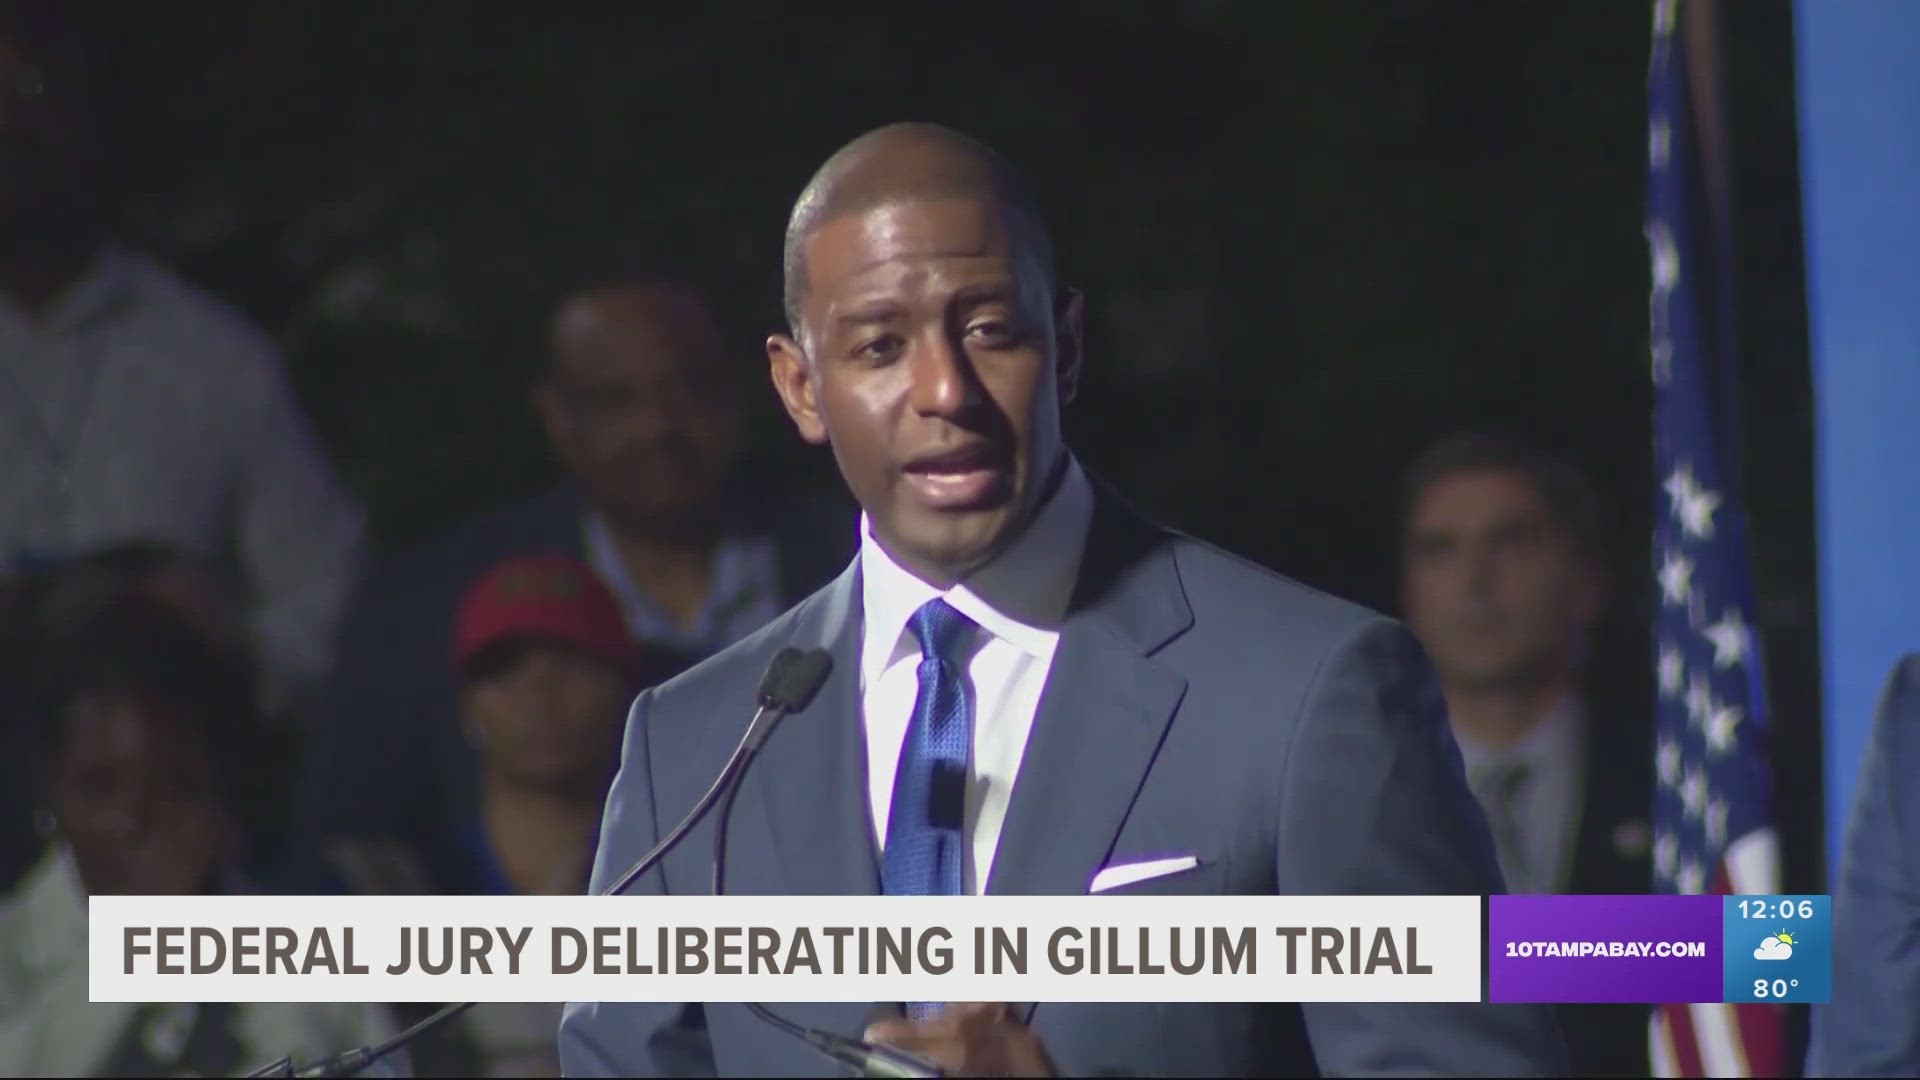 Gillum faces charges of lying to the FBI and wire fraud.